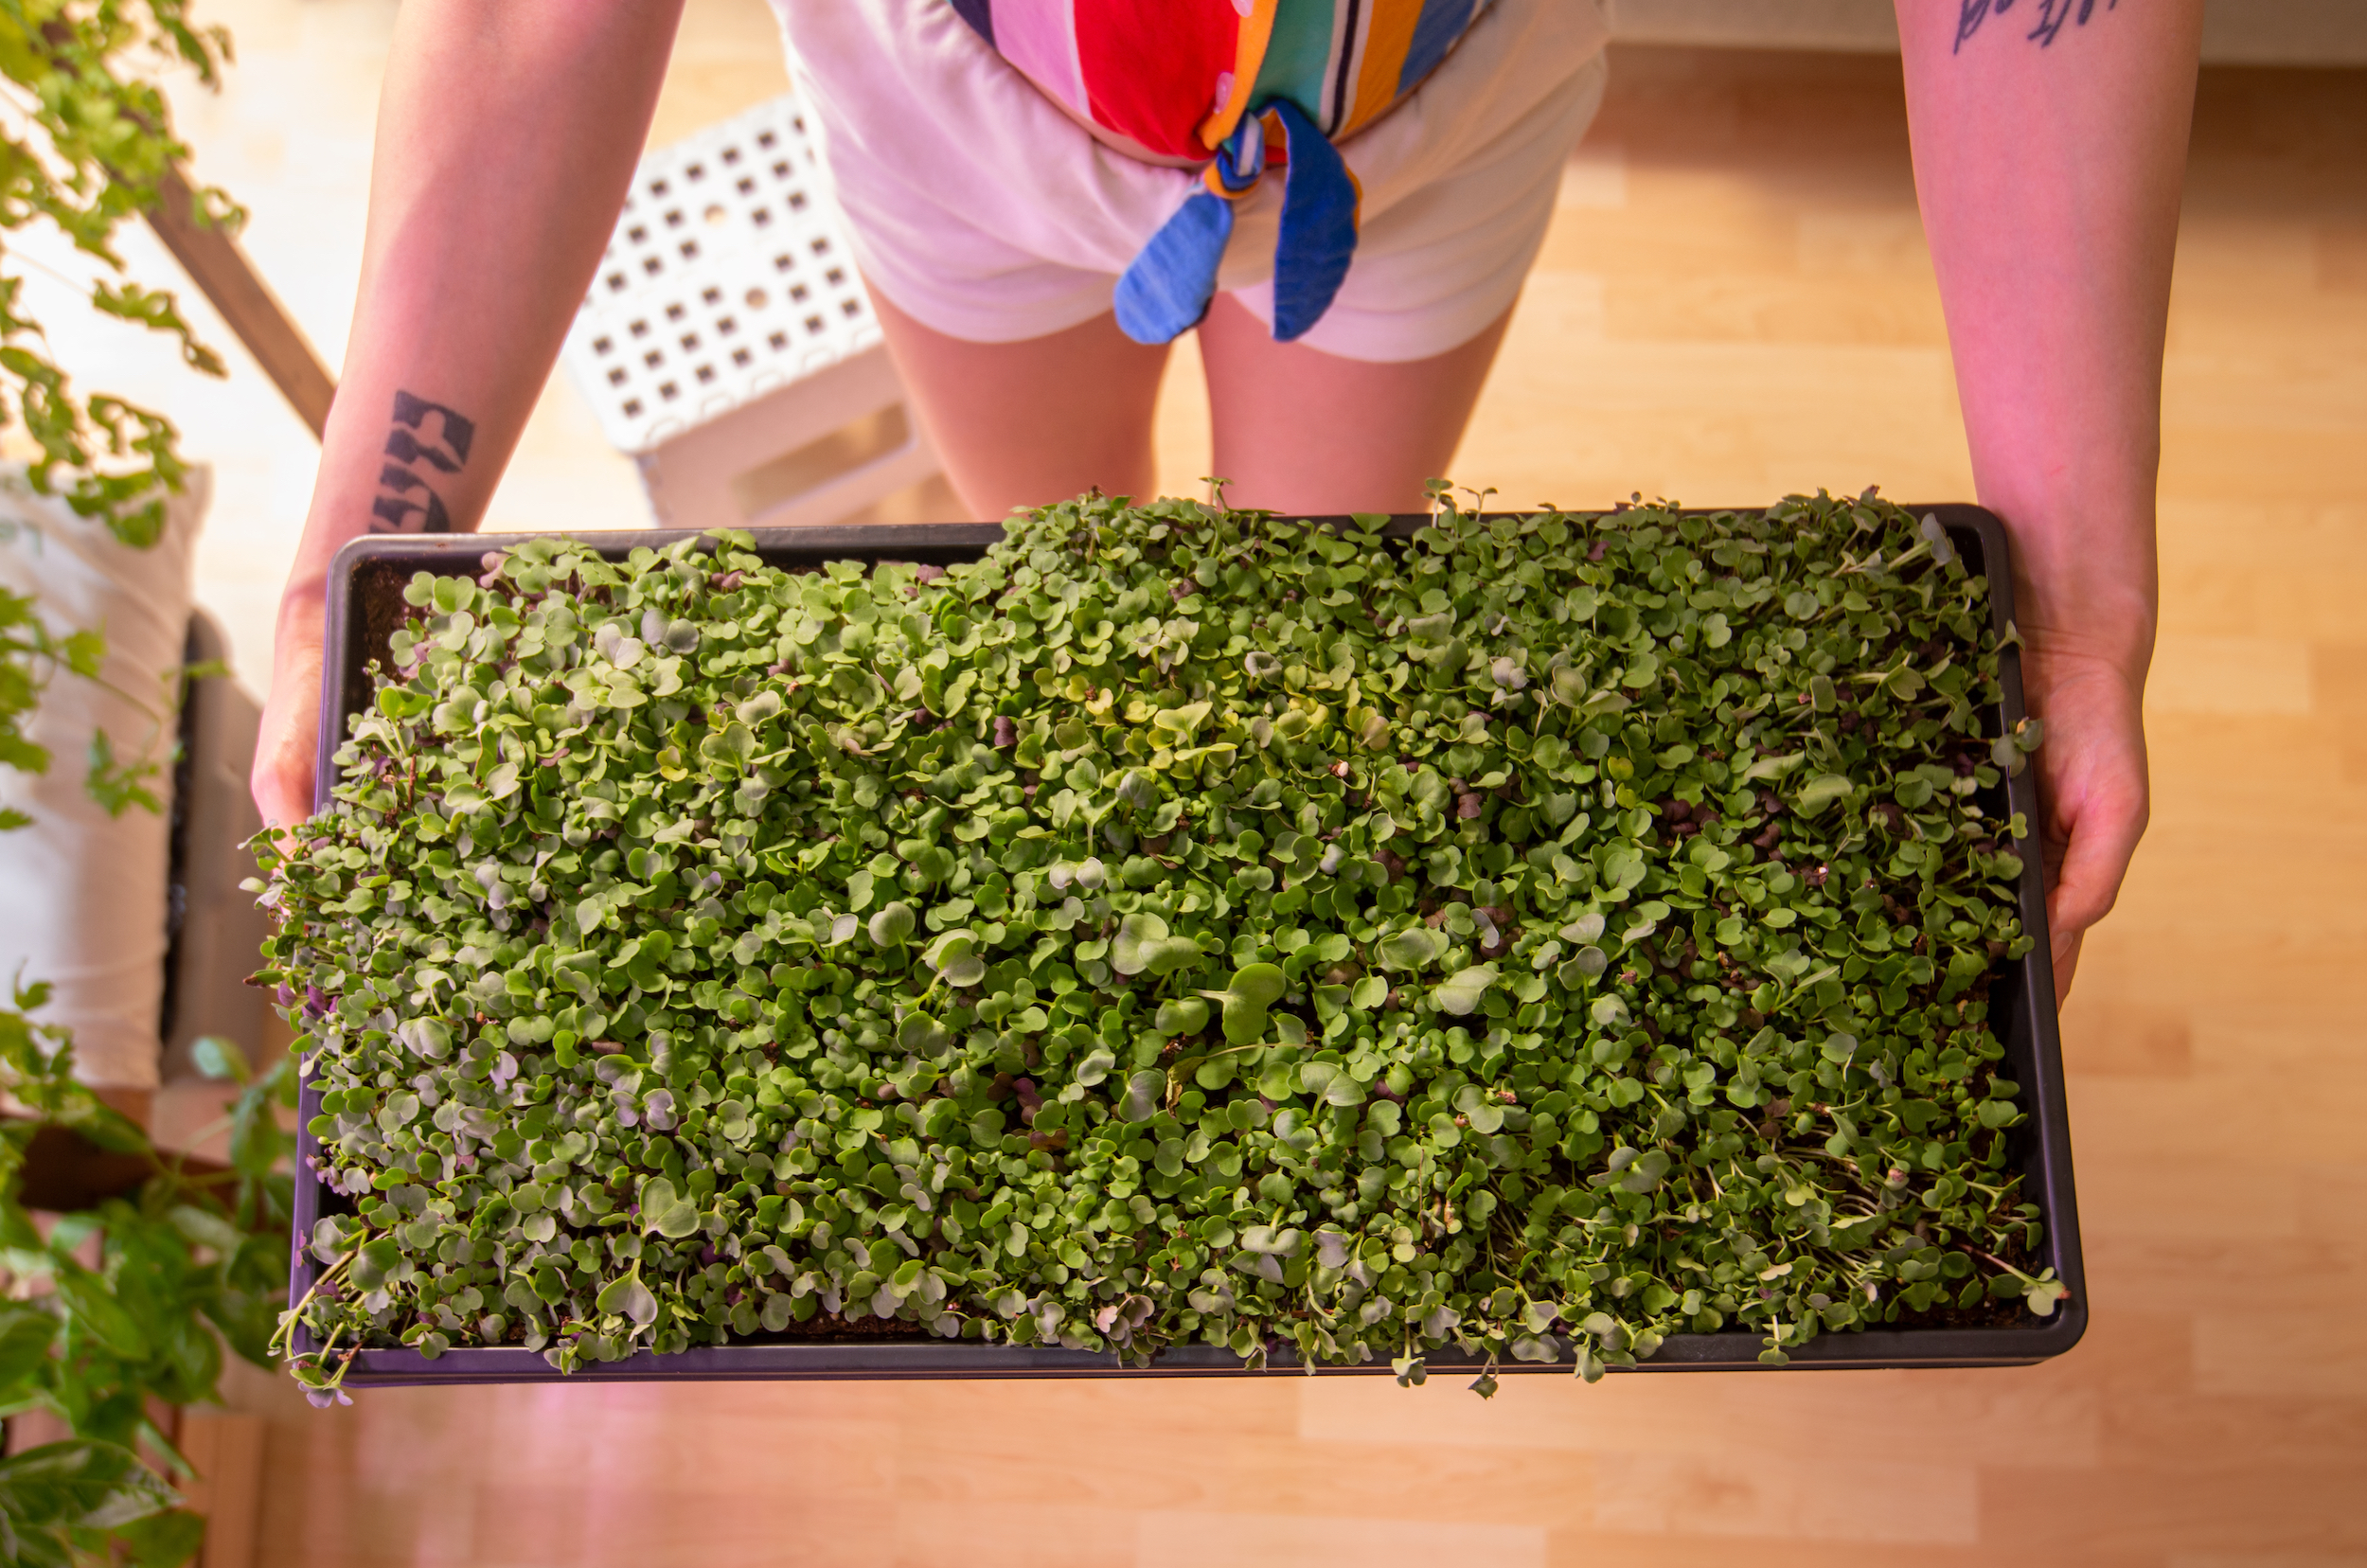 Mel Bronwyn holding a tray of microgreens from her condo garden.